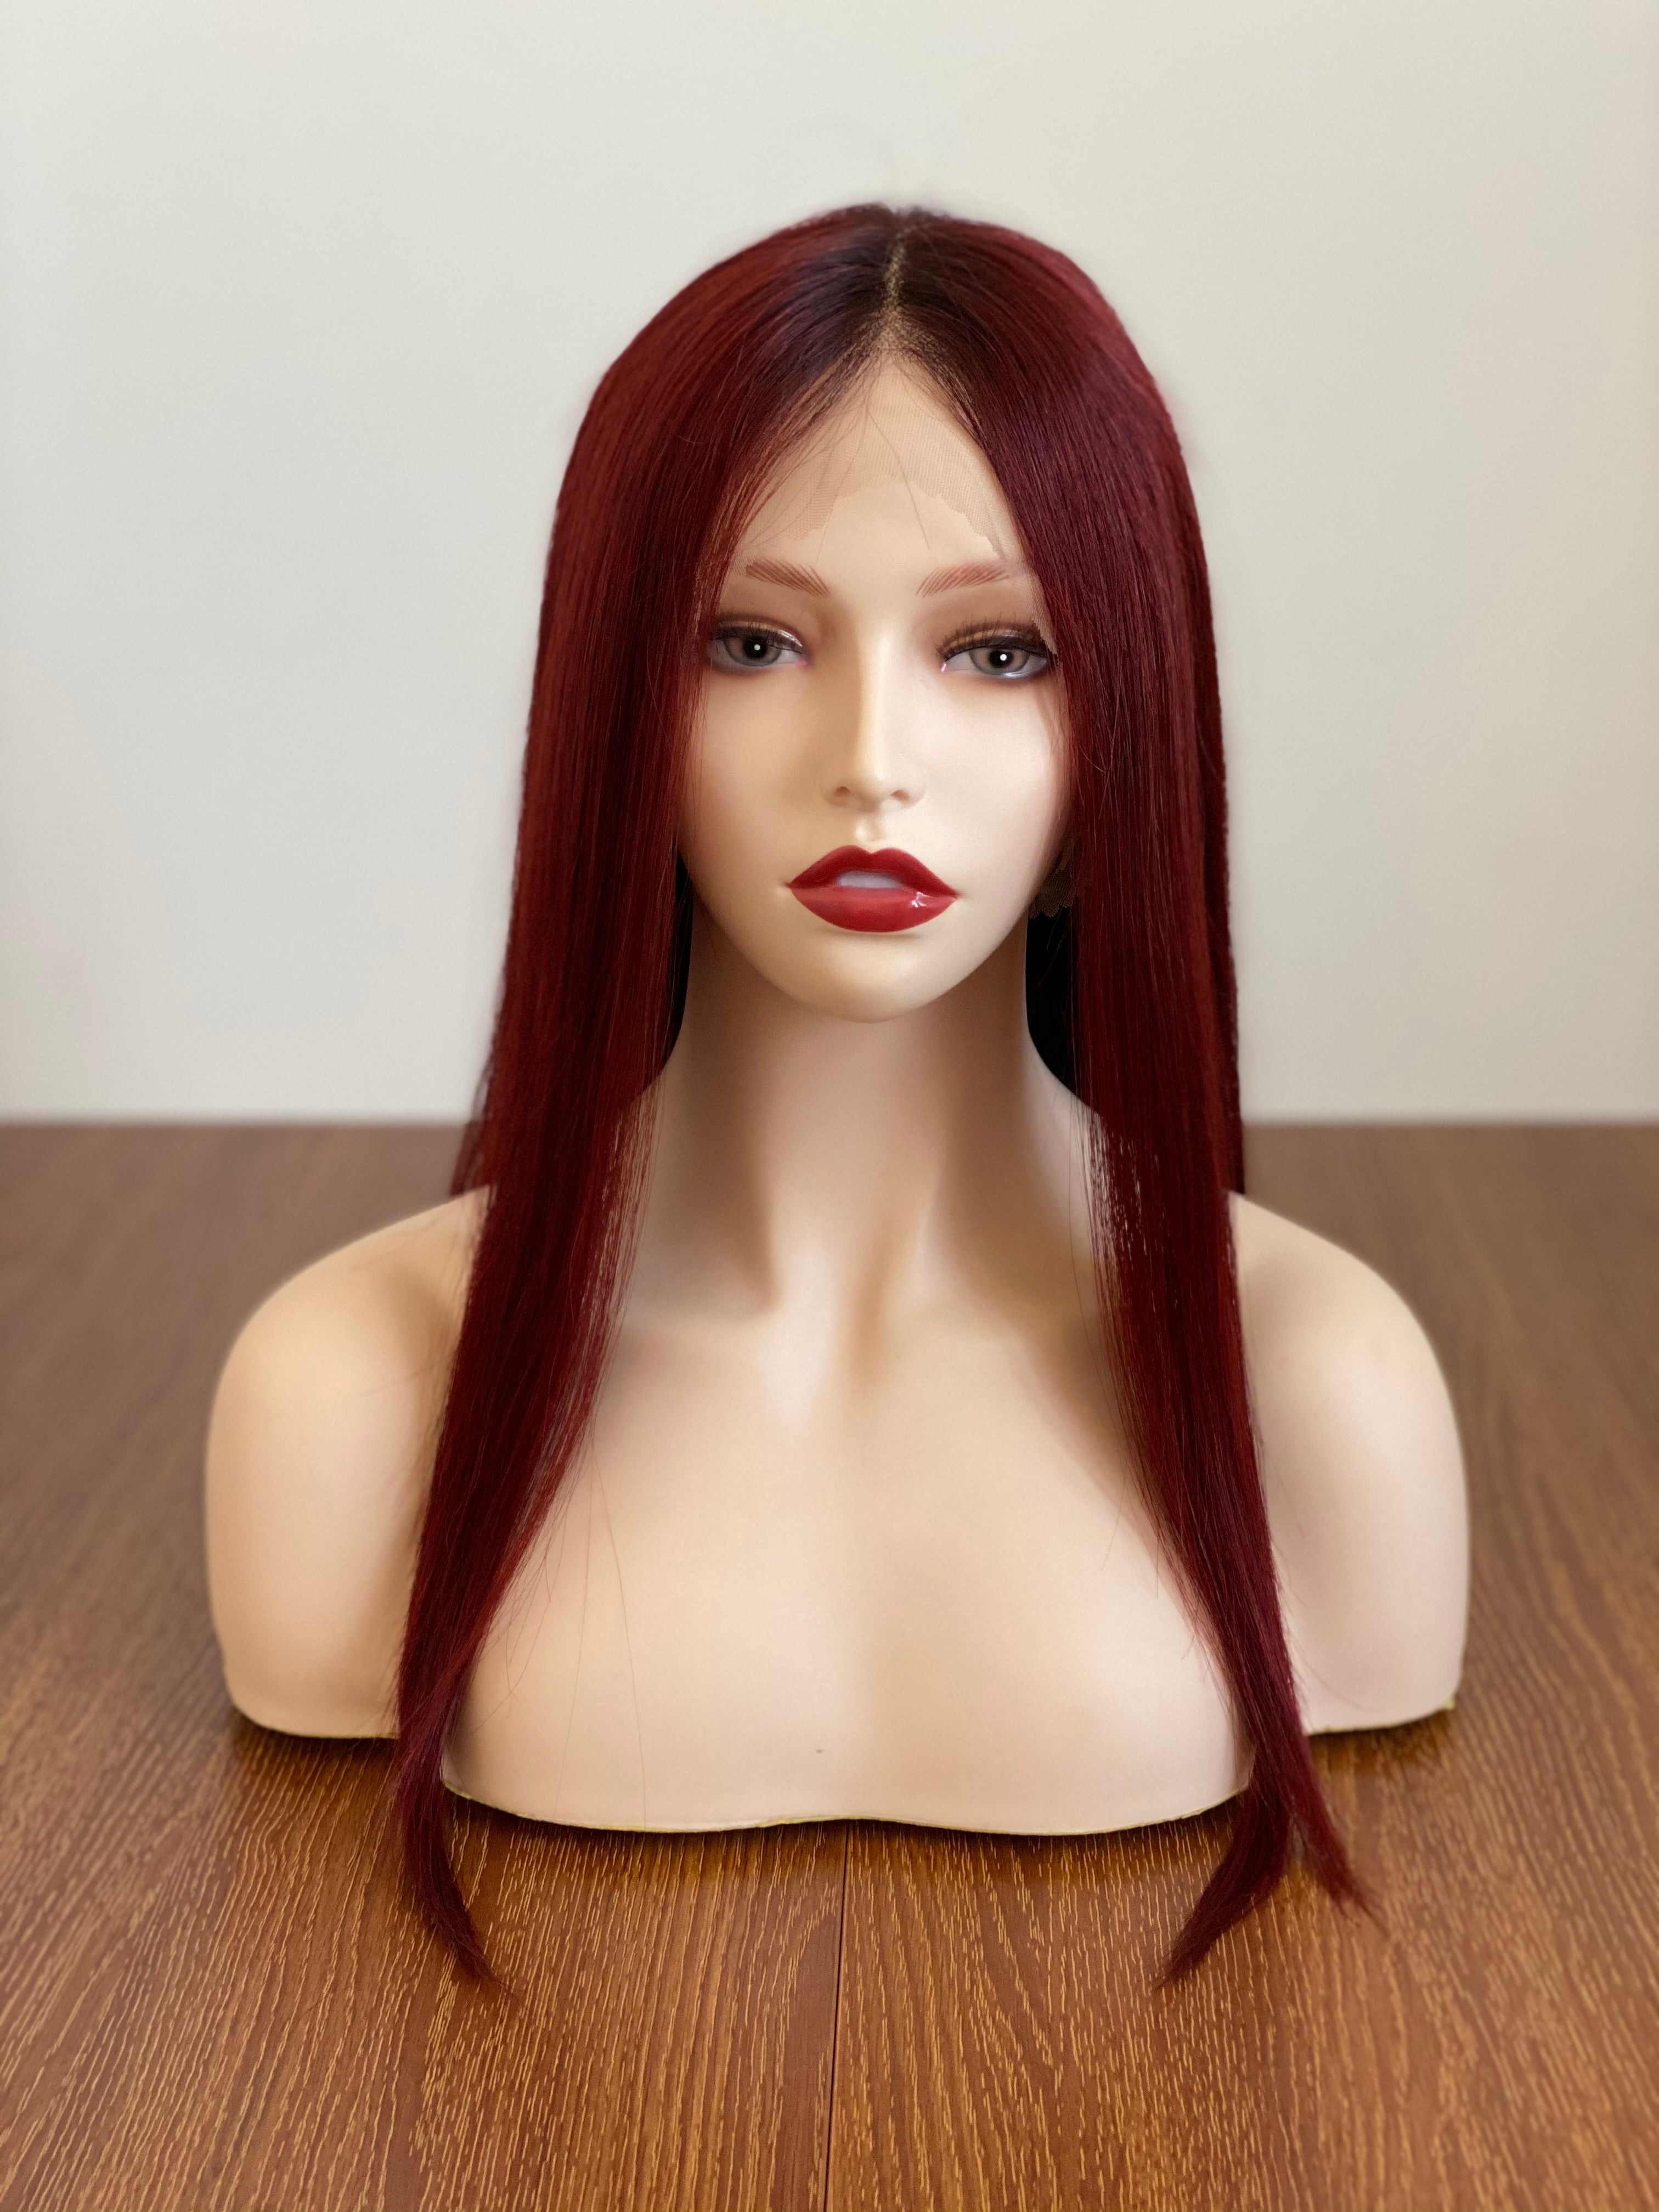 What’s the difference between Human Hair Lace Front Wigs and Full Lace Wig?